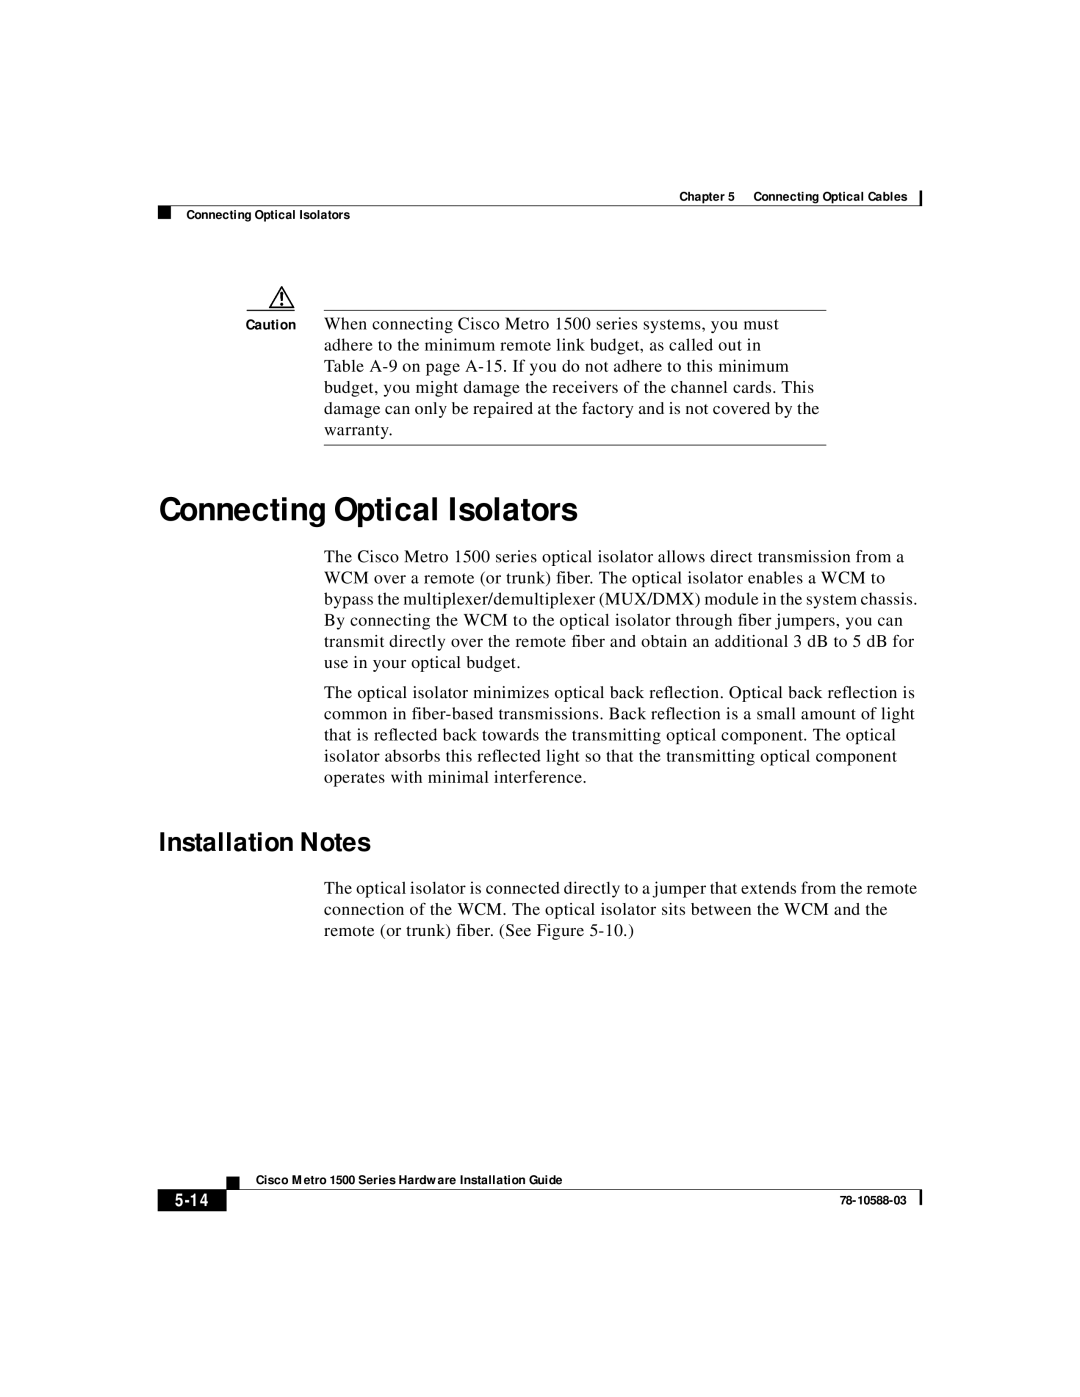 Cisco Systems 1500 manual Connecting Optical Isolators, Installation Notes, 5-14 